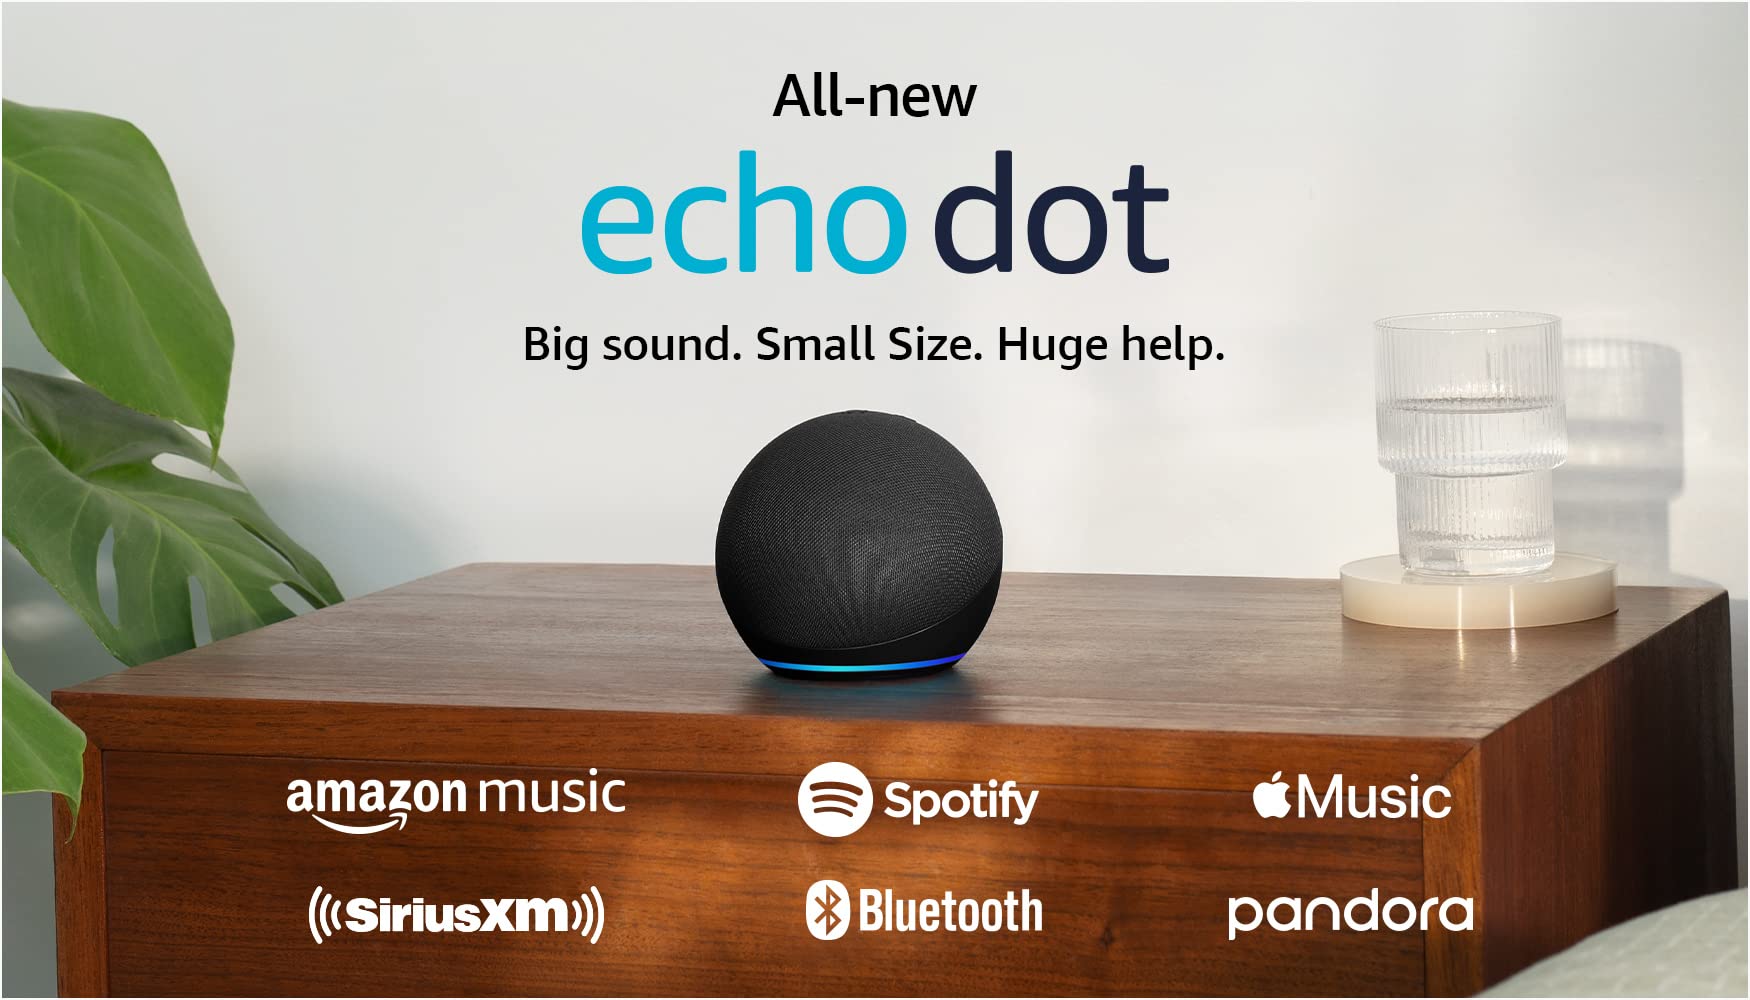 Echo Dot (5th Gen, 2022 release) | With bigger vibrant sound, helpful routines and Alexa | Charcoal